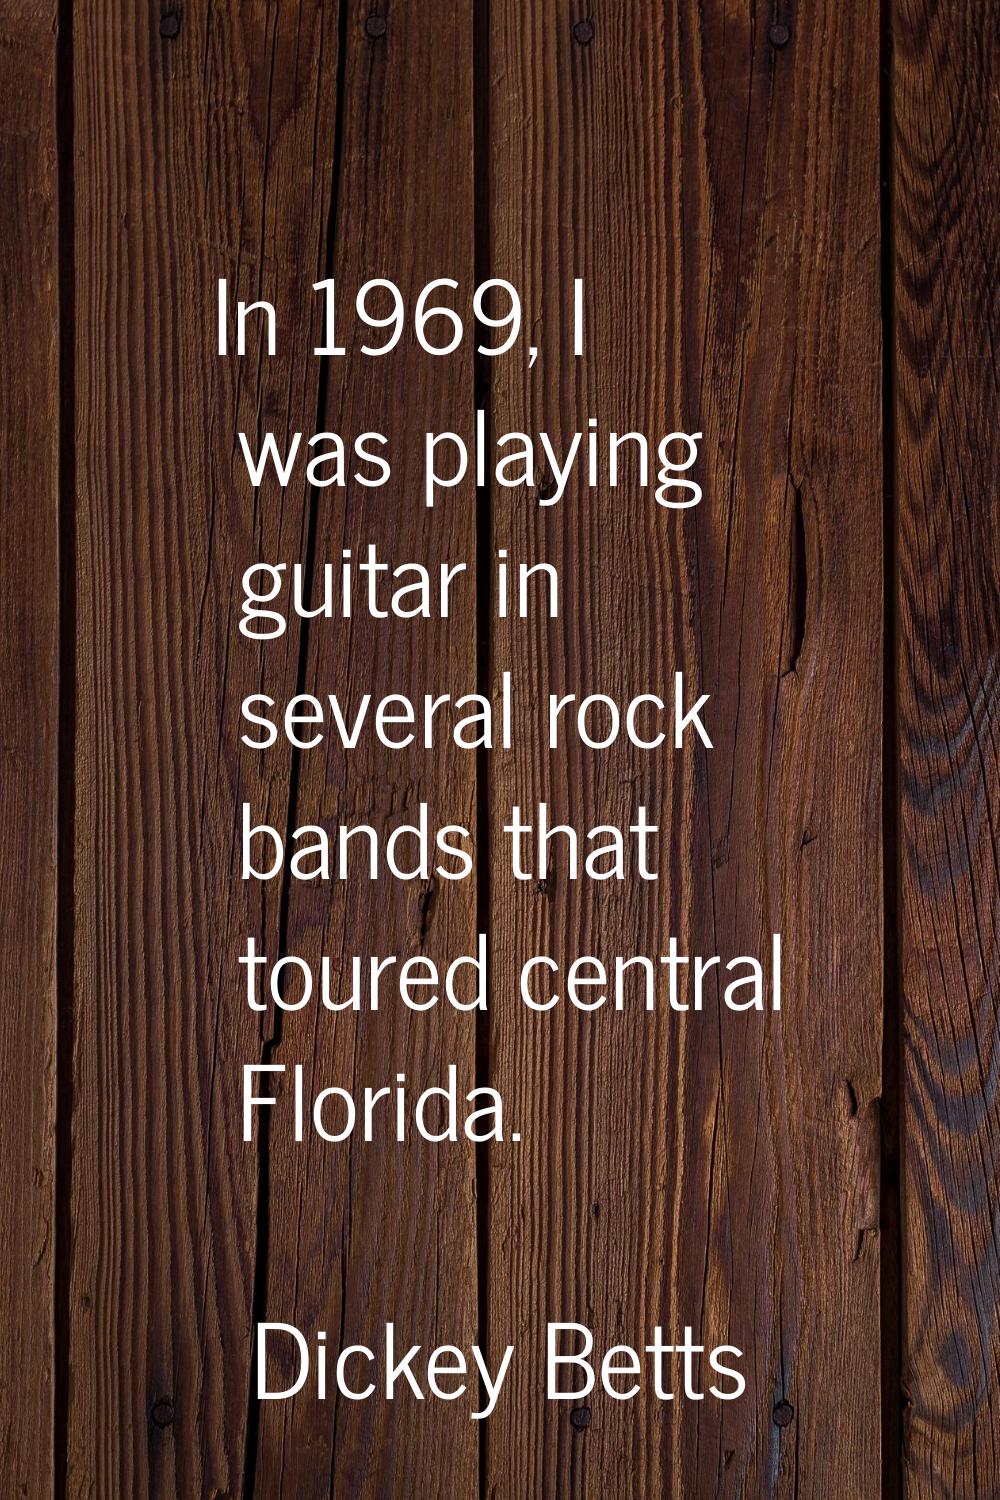 In 1969, I was playing guitar in several rock bands that toured central Florida.